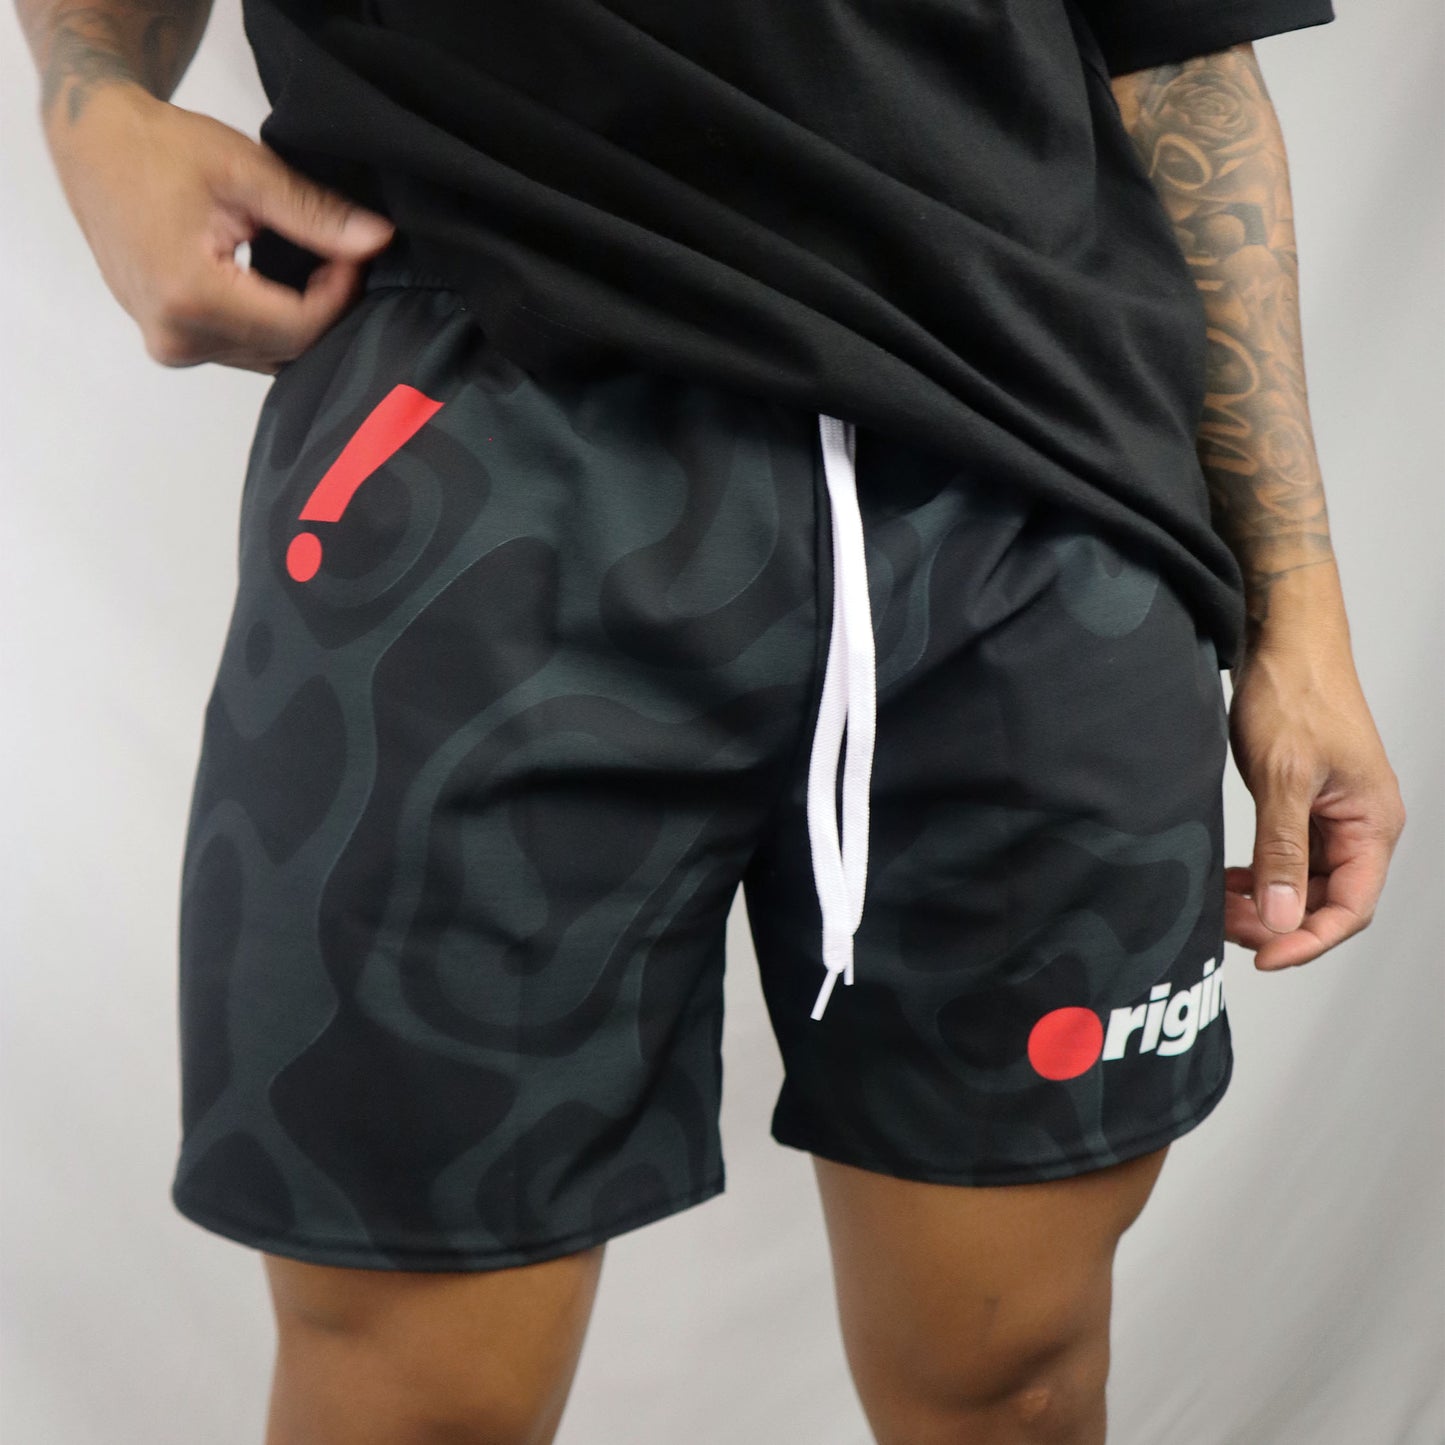 Mens Topographic Camouflage Athletic Shorts